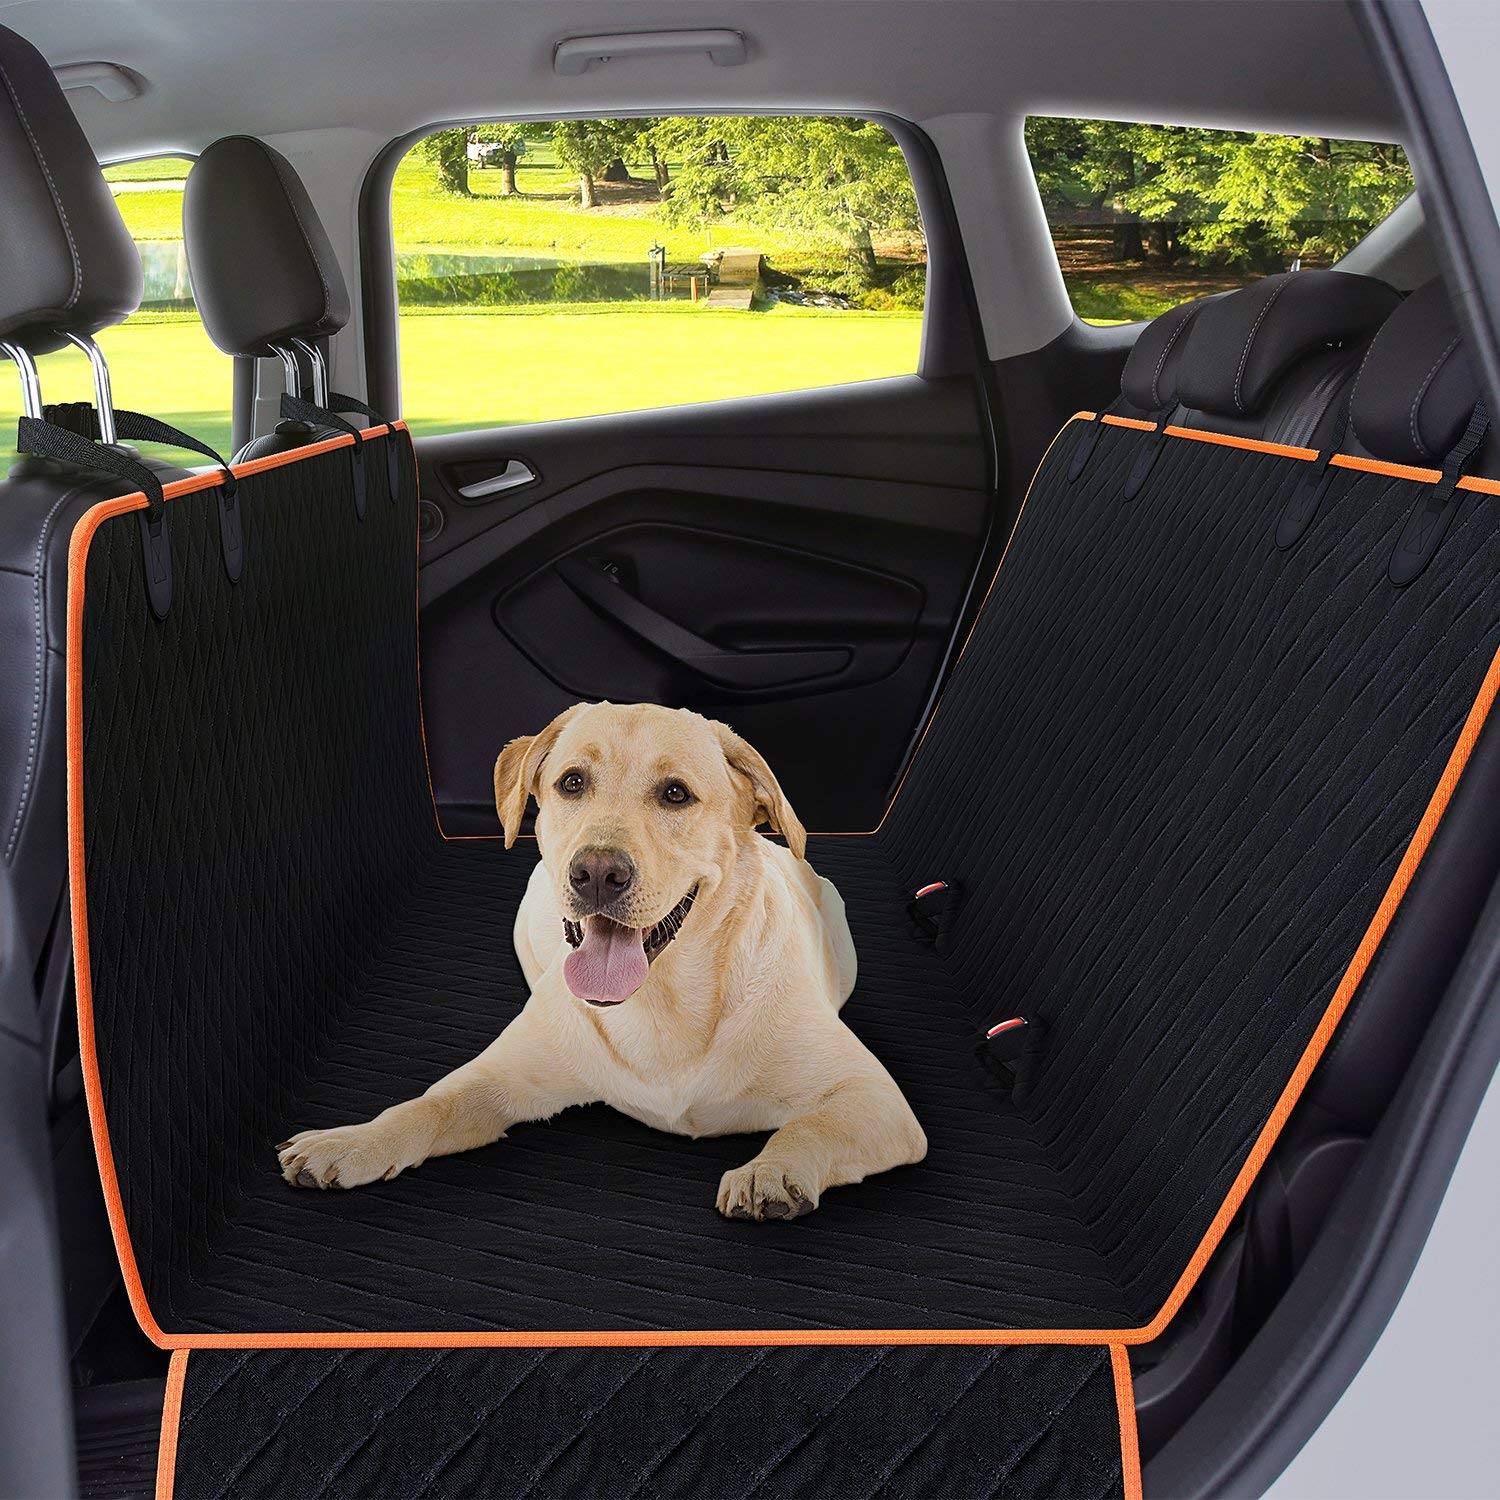 AIOIAI Dog Back Seat Cover Protector Waterproof Scratchproof Nonslip Hammock for Dogs Backseat Protection Against Dirt and Pet Fur Durable Pets Seat Covers for Cars Trucks SUVs 